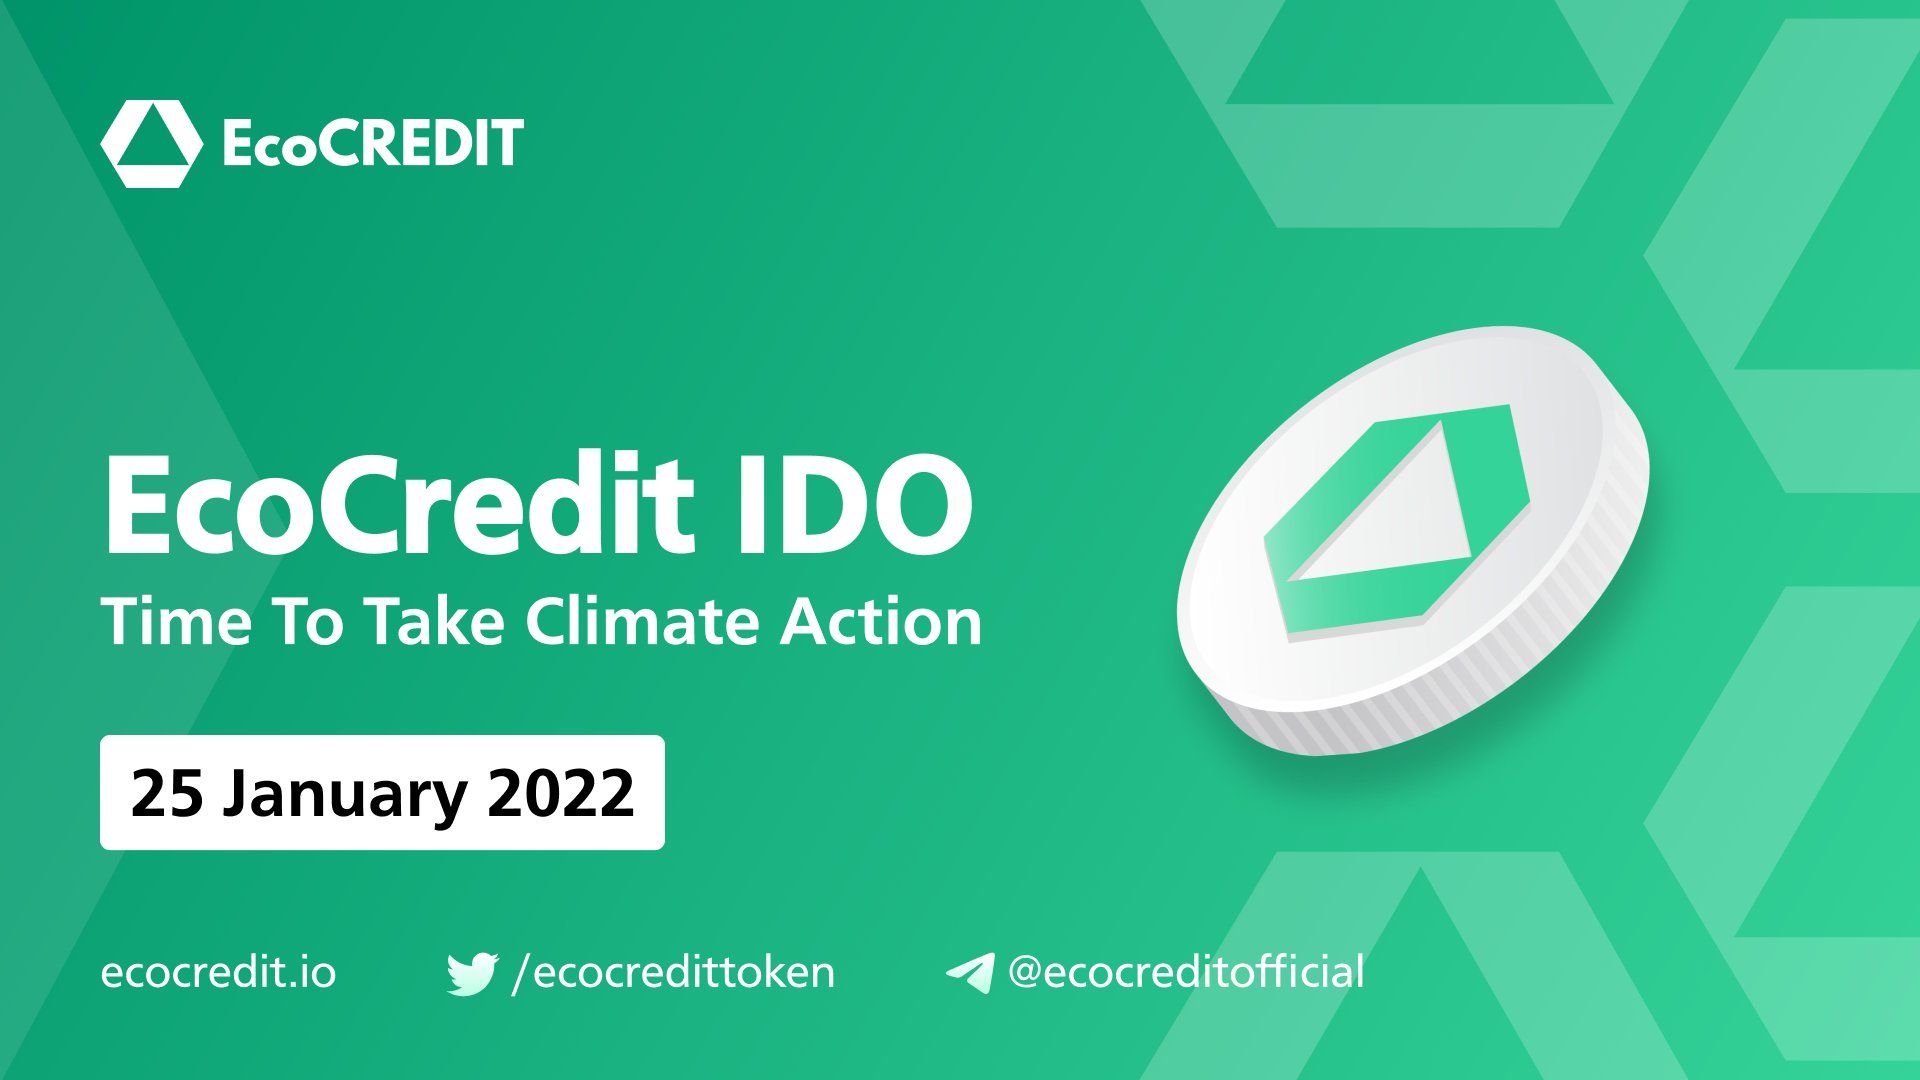 EcoCREDIT - Bringing Carbon Credits On-Chain Ecosystem has come on Infinite Launch